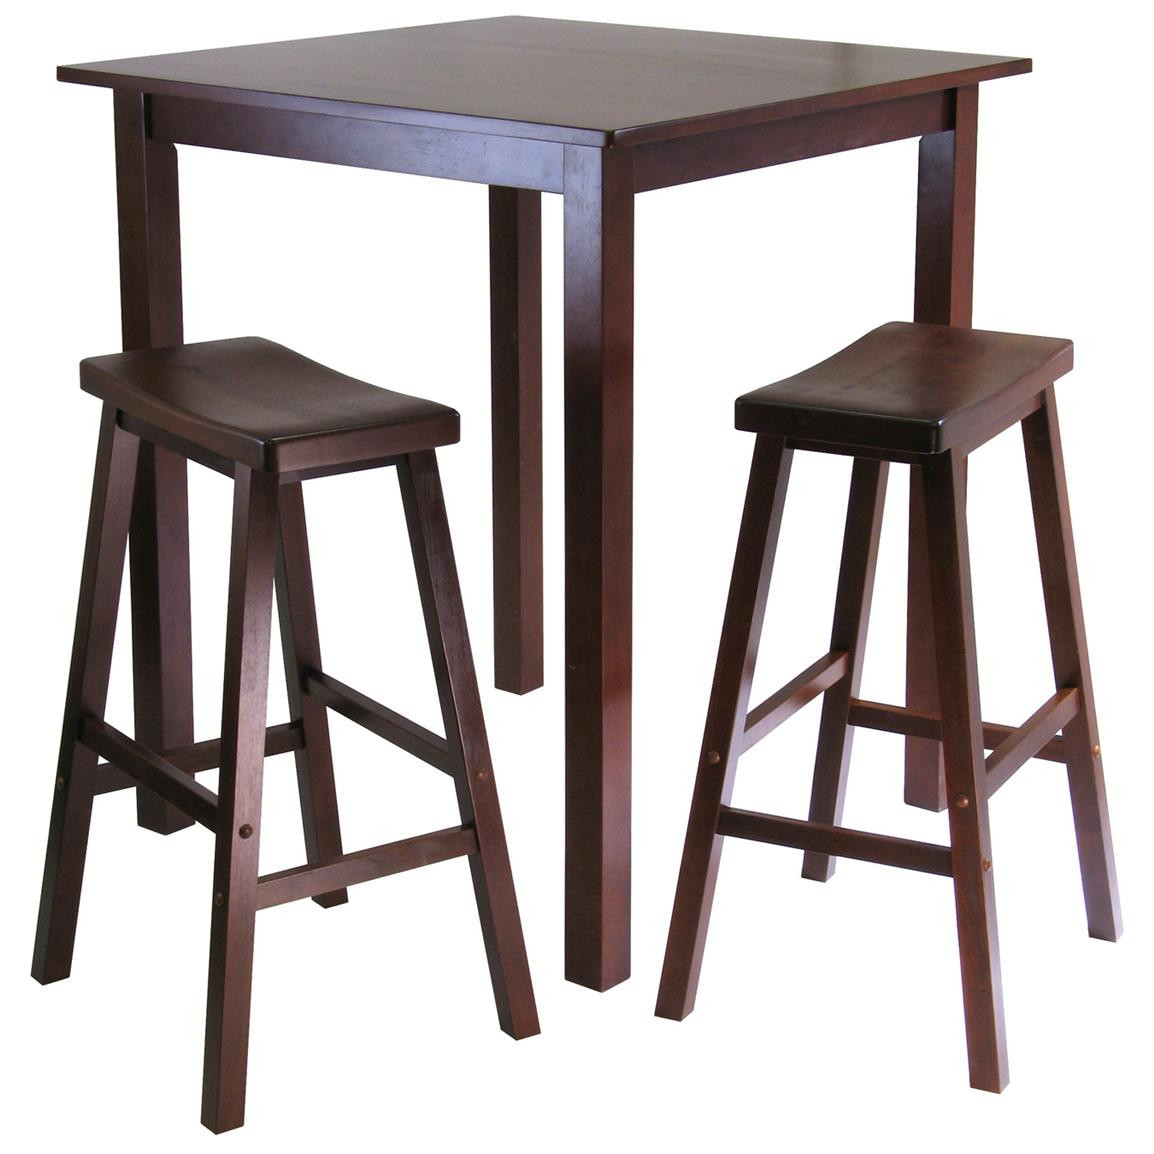 Small Kitchen Tables With Stools
 Pub Tables and Stools